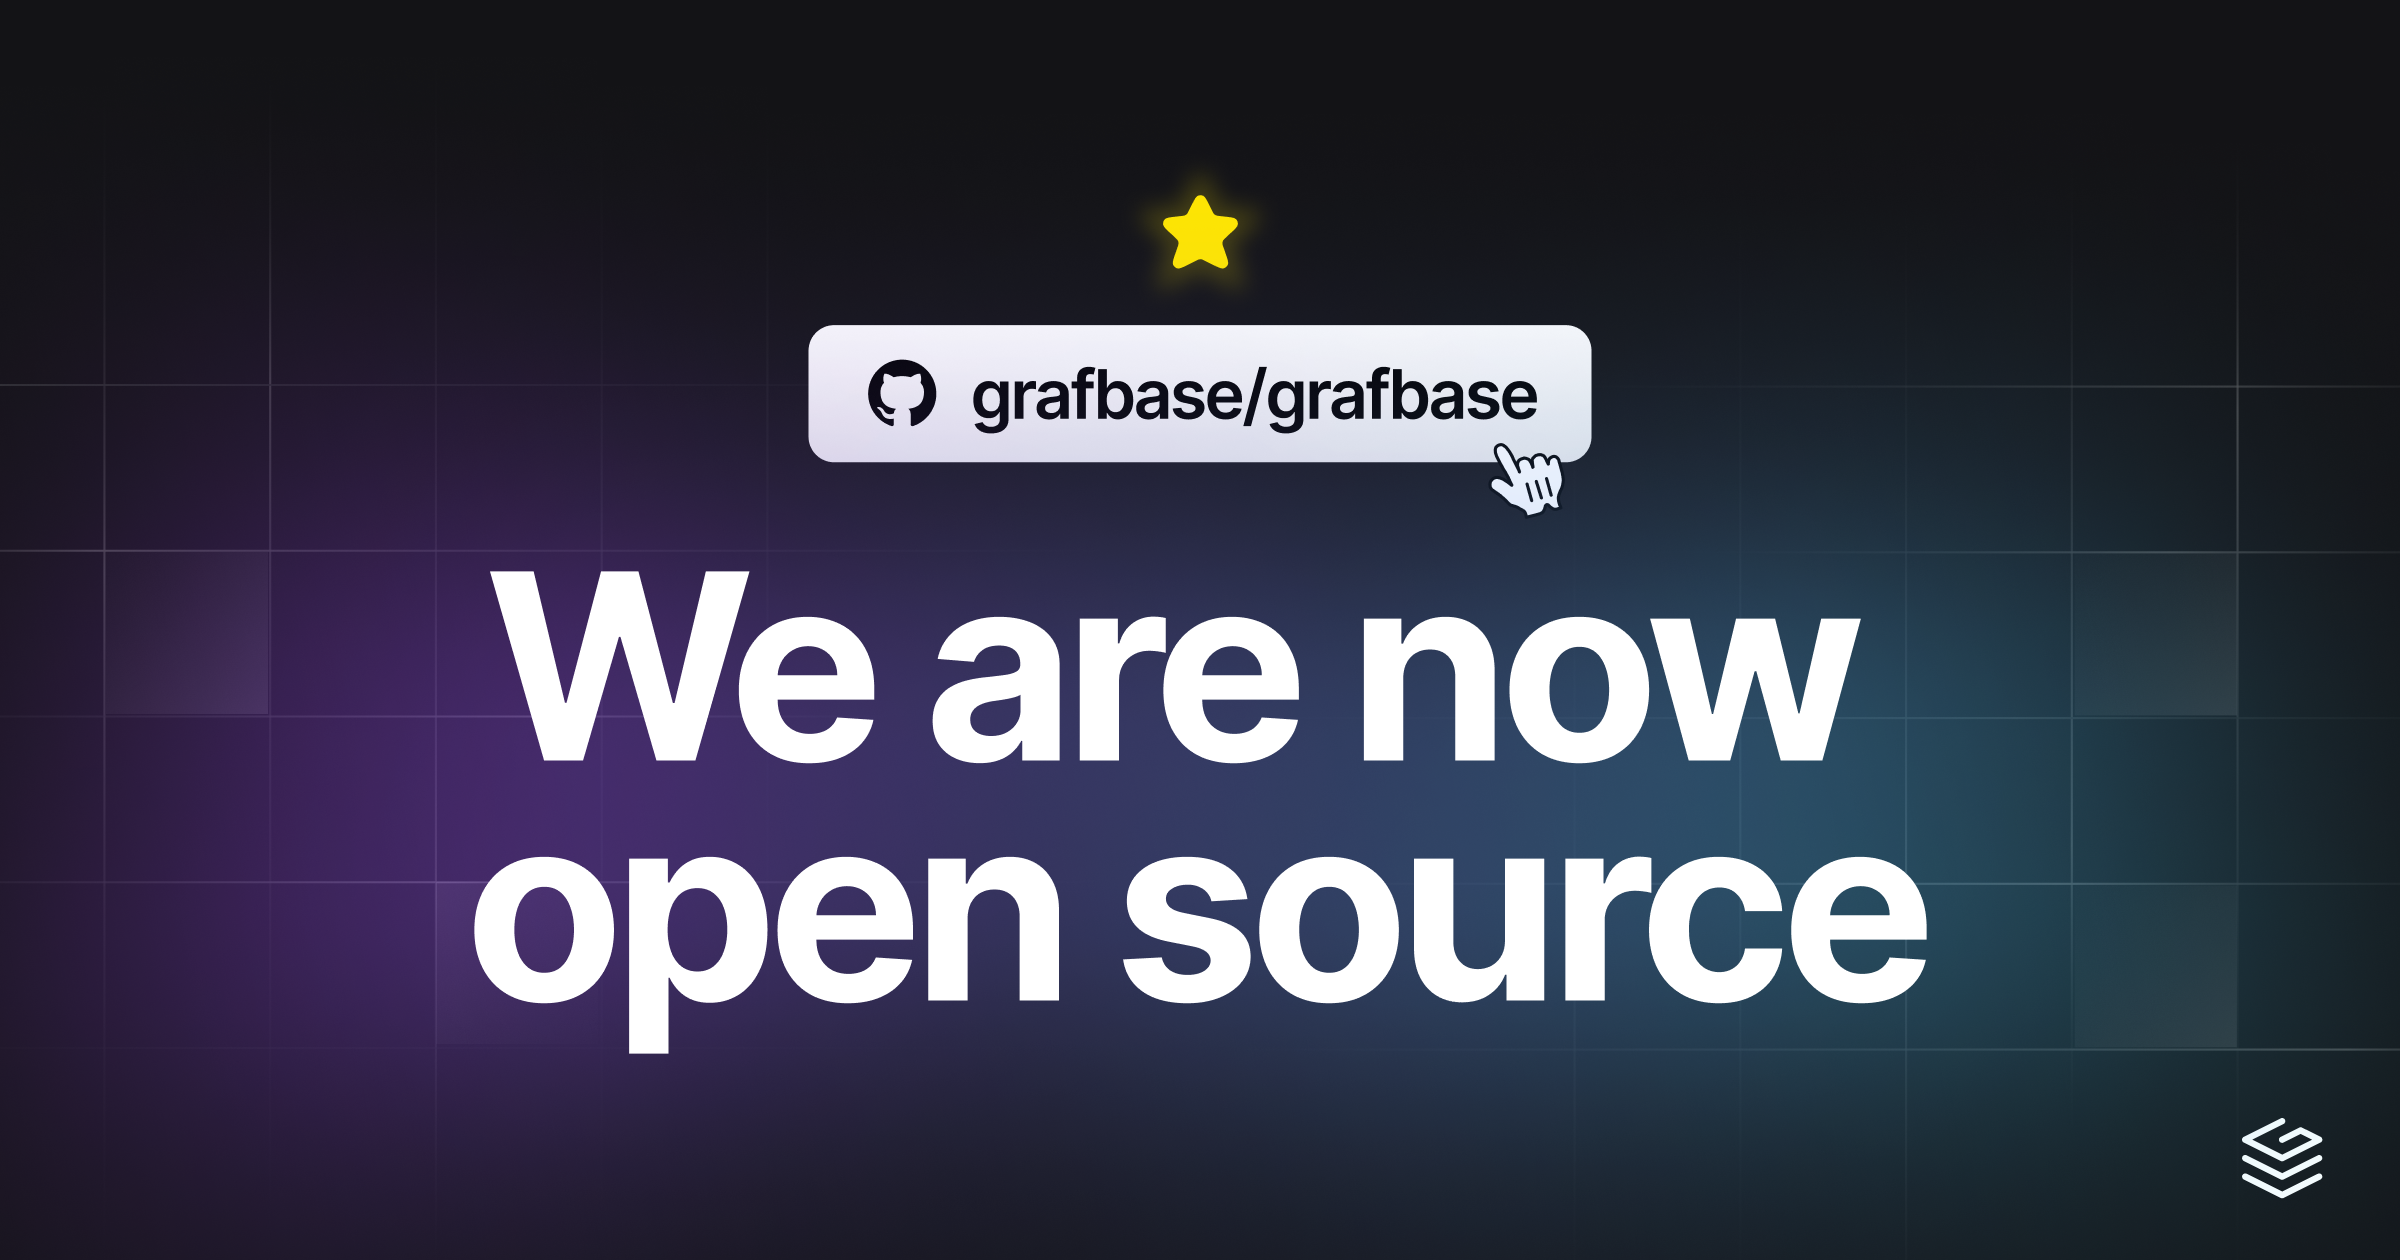 At Grafbase, as with most modern tech companies, our code relies on open source and open standards. We have built our platform on Rust and WebAssembly